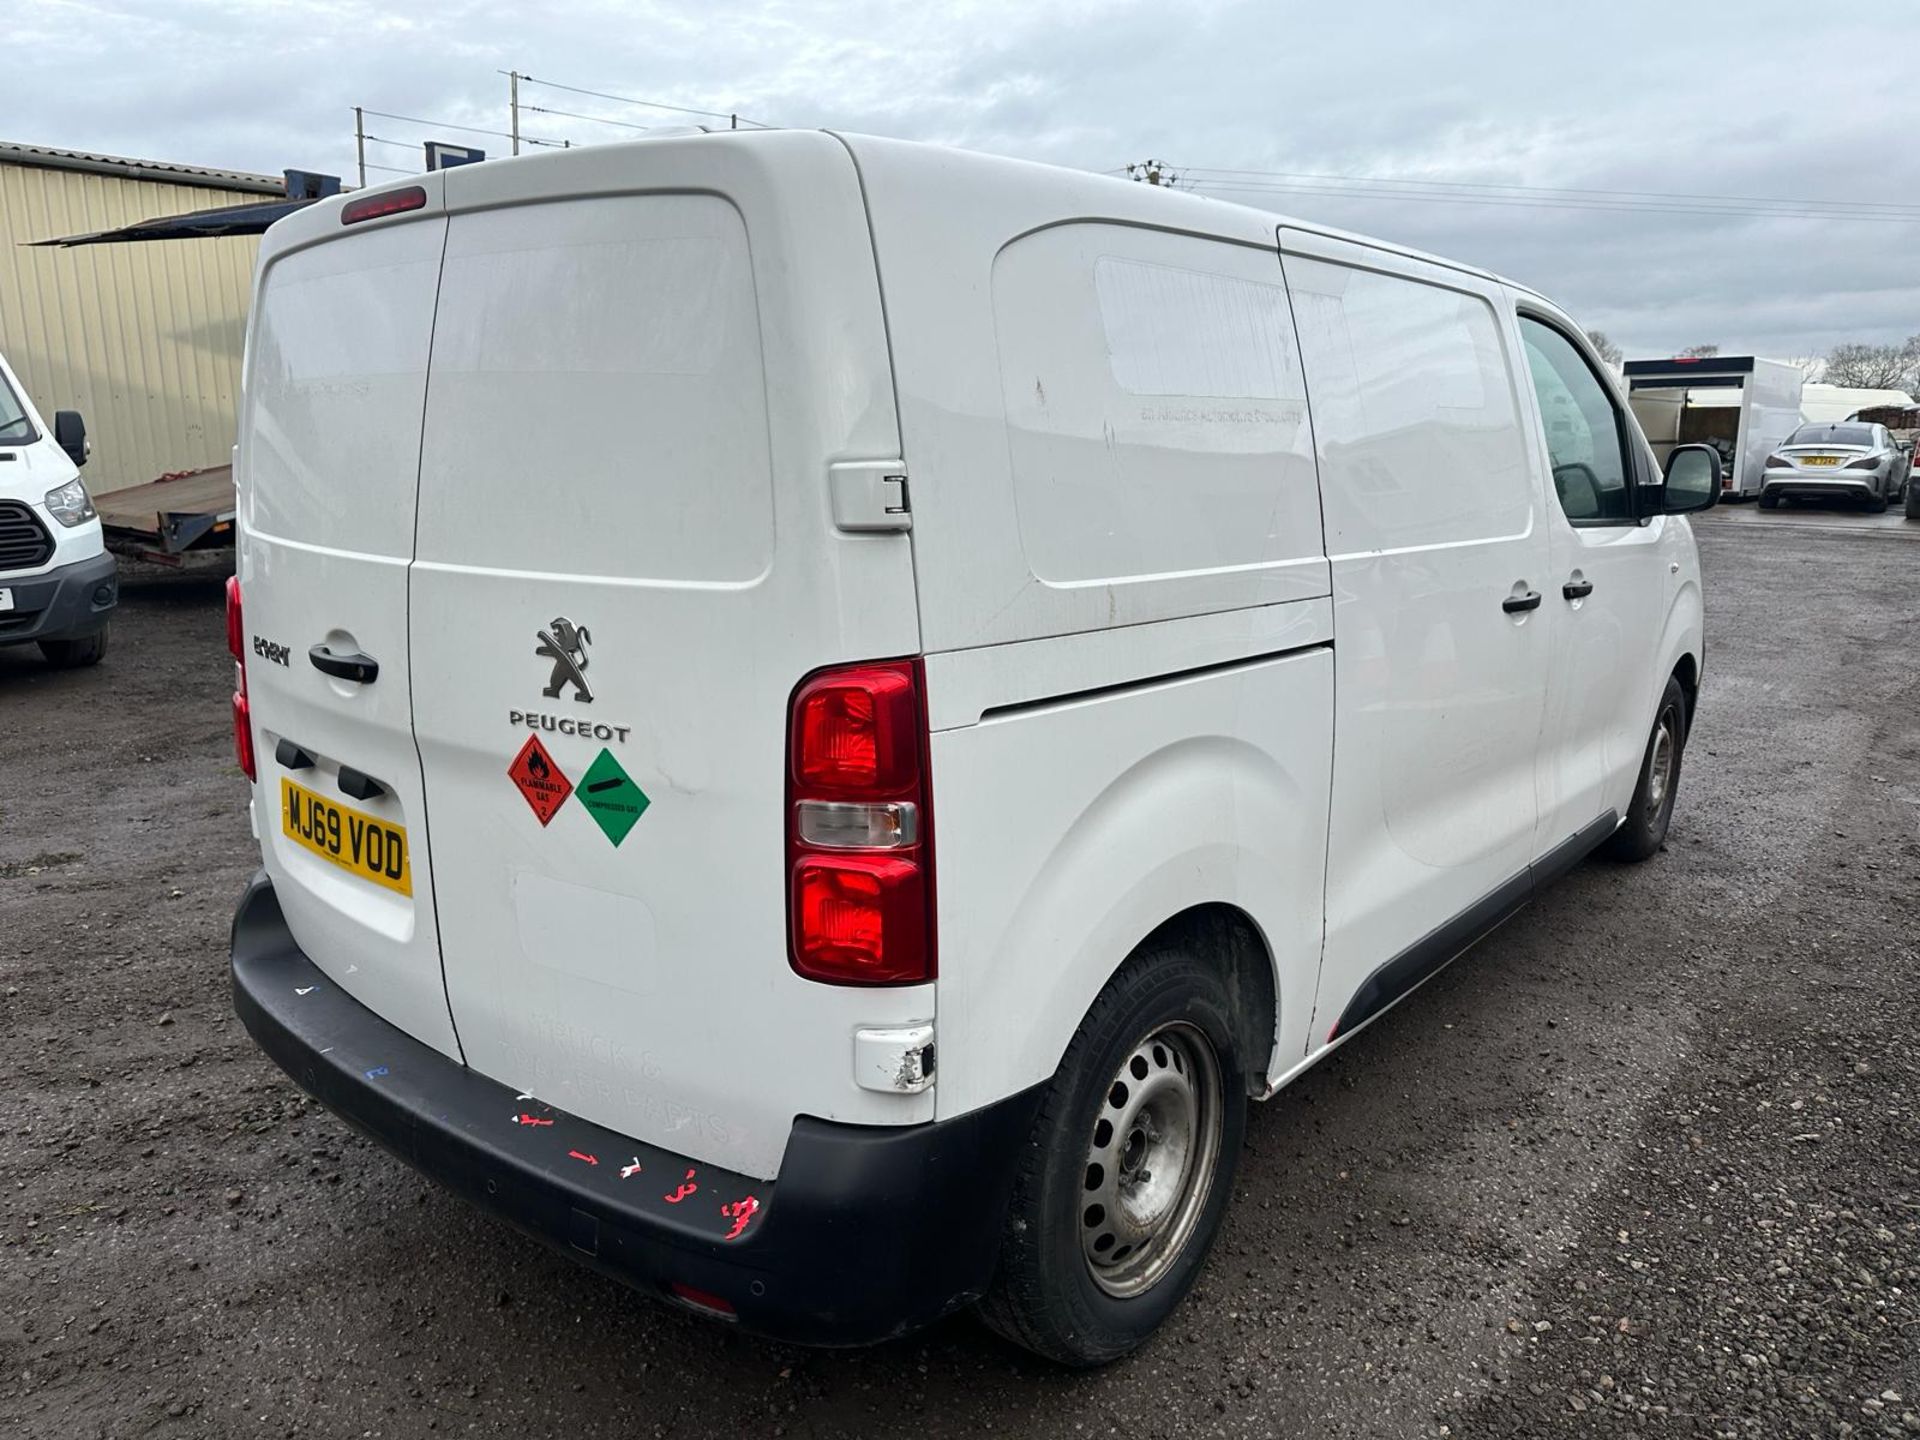 2019 69 PEUGEOT EXPERT PANEL VAN - 140K MILES - AIR CON - PLY LINED - Image 6 of 10